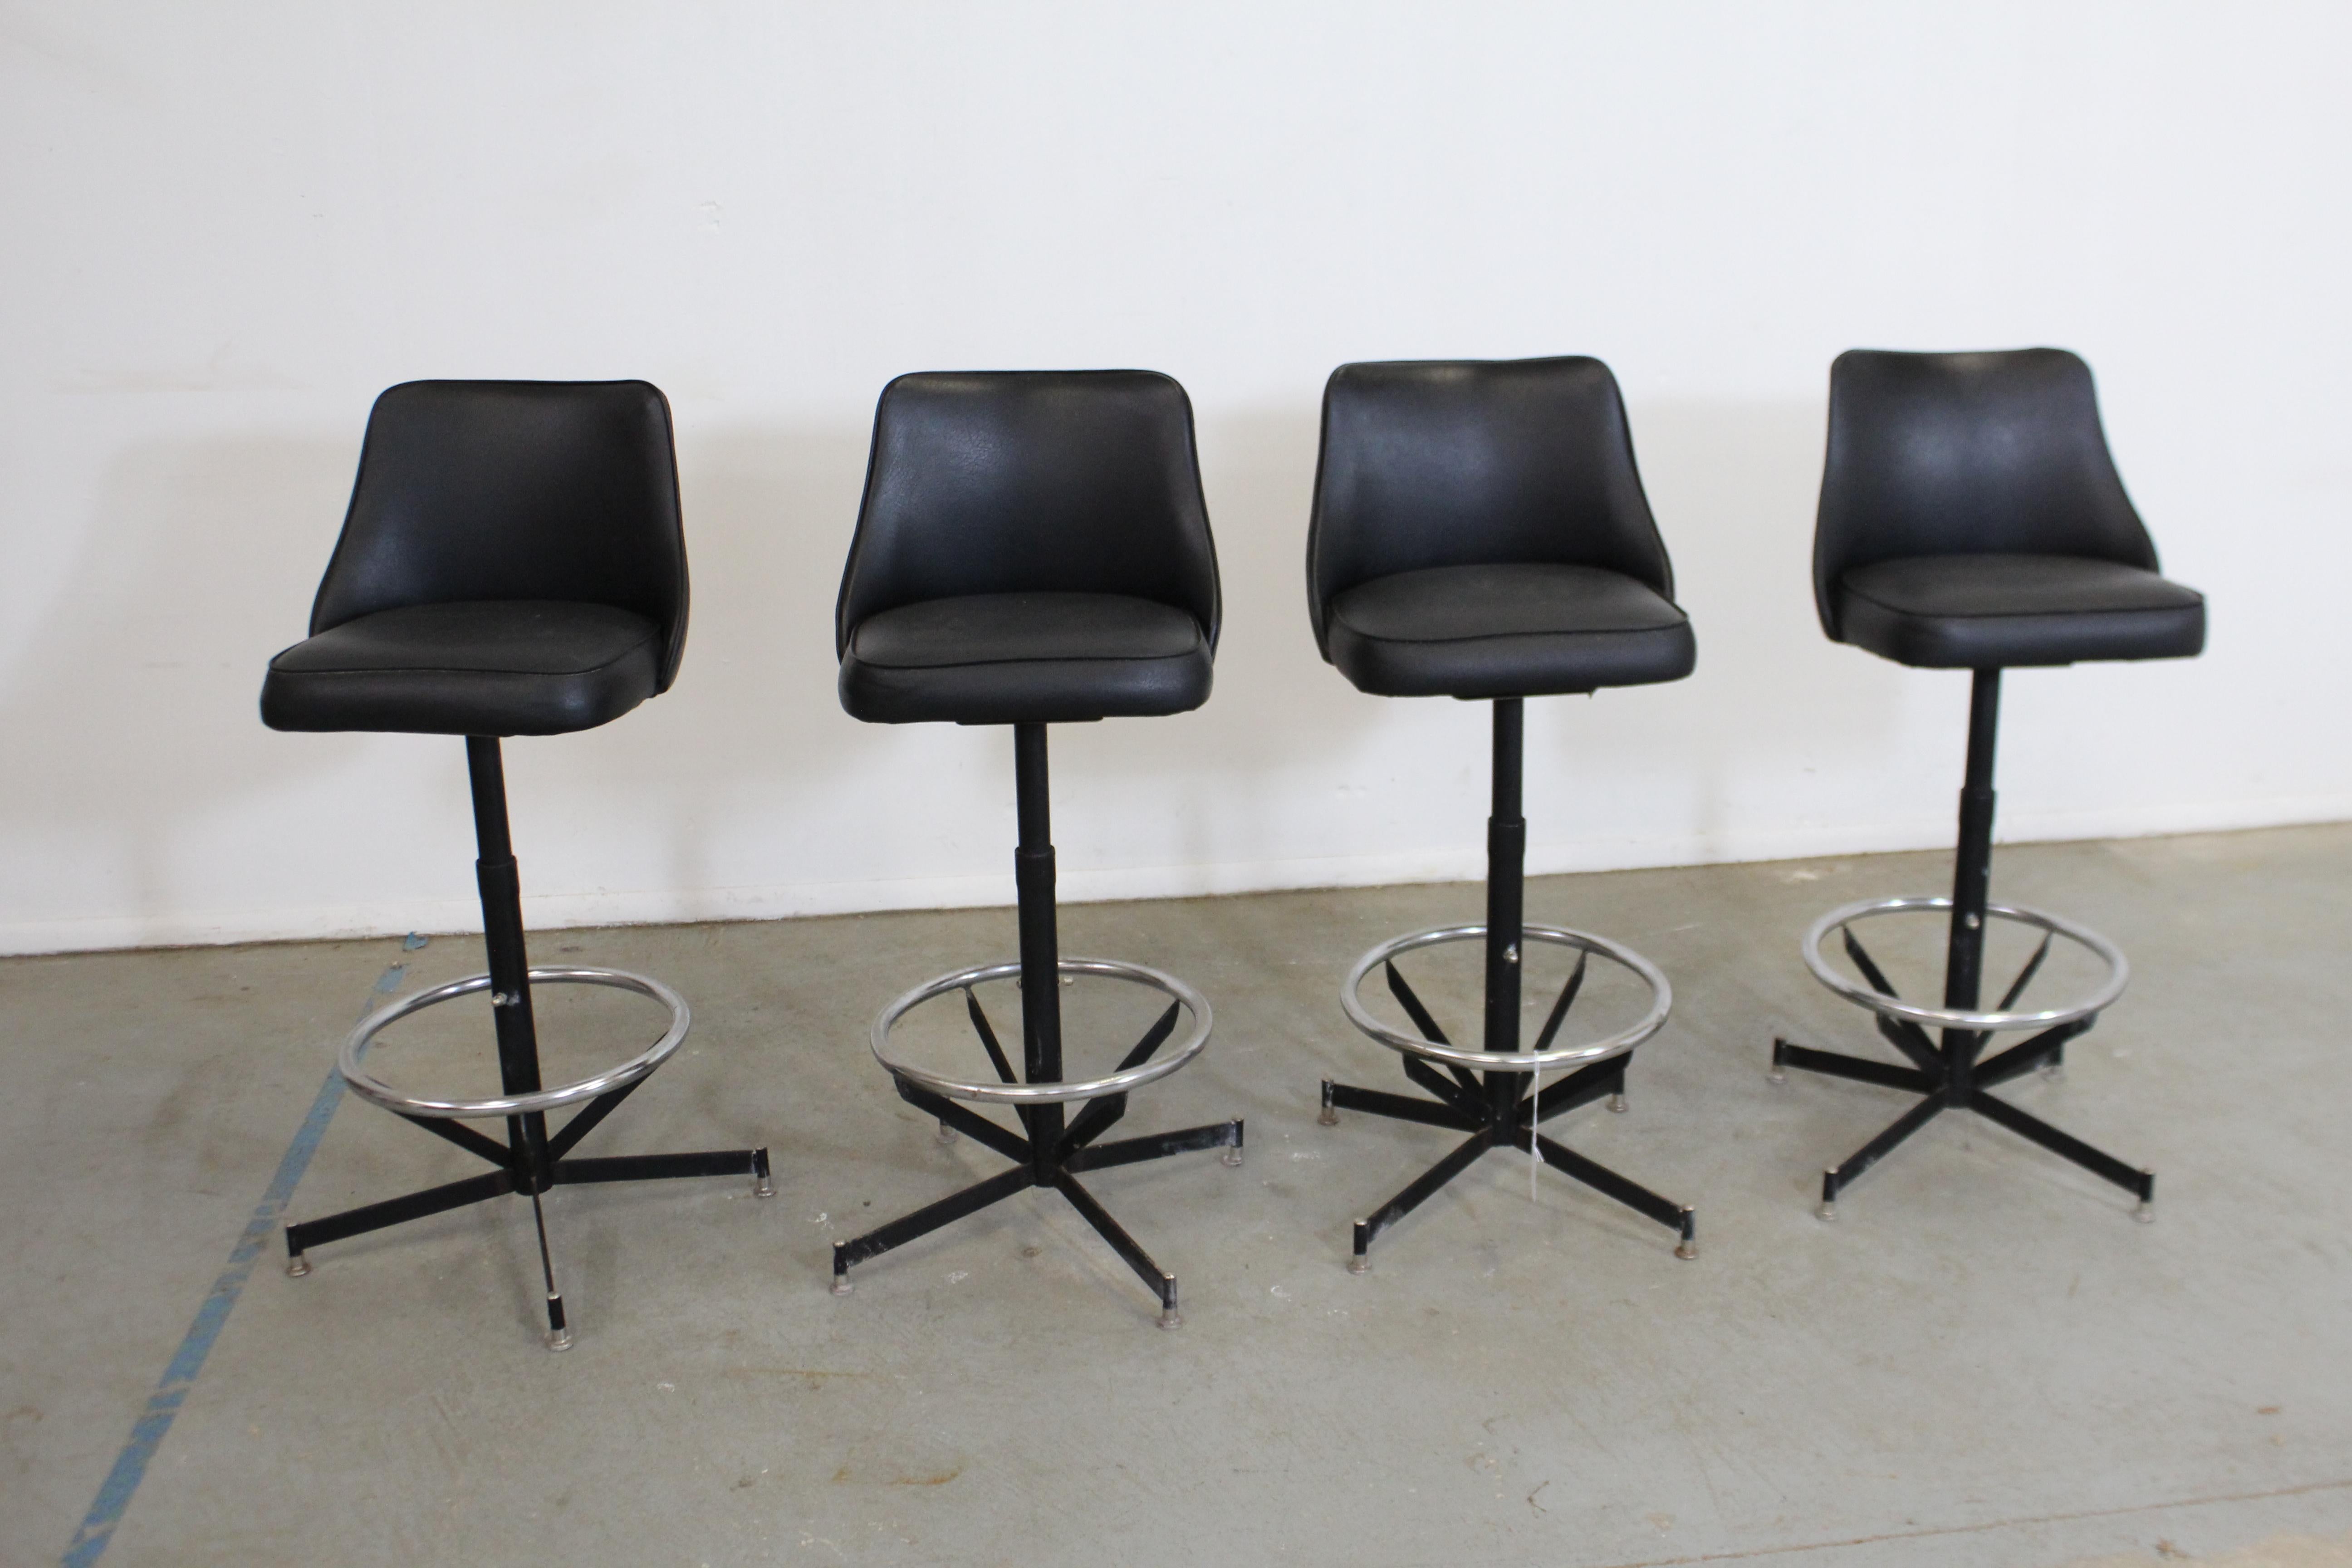 Set of 4 midcentury Danish modern swivel bar stools 

Offered is a great set of 4 Mid-Century Modern swivel bar stools. These stools swivel and feature black bases. They are in good condition for their age, showing some wear (age wear,chrome